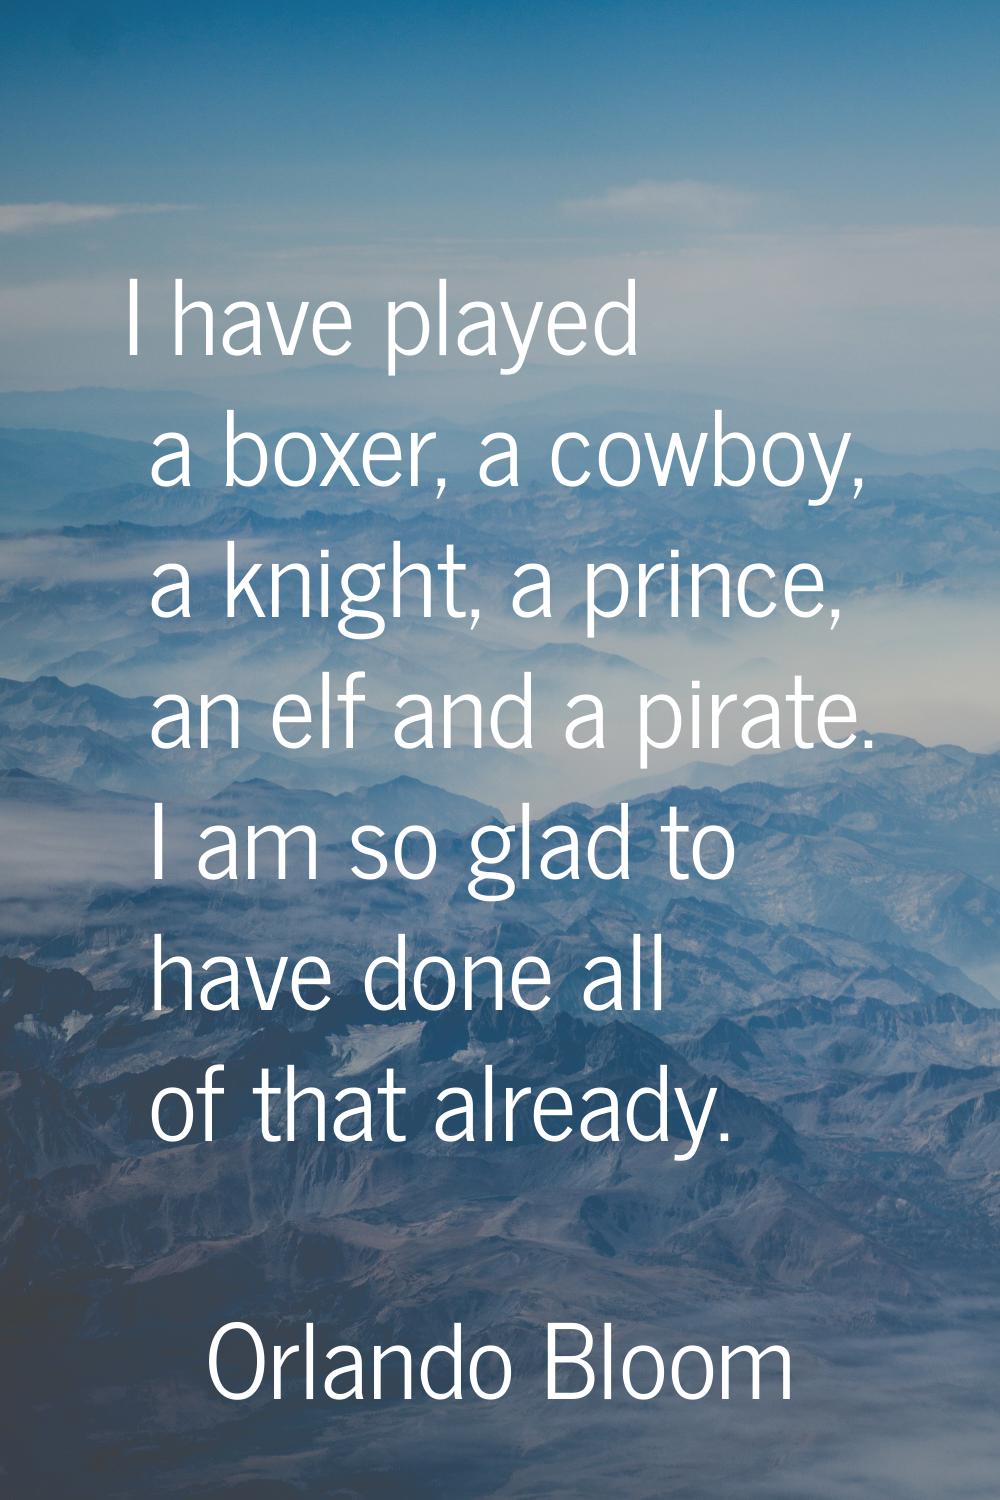 I have played a boxer, a cowboy, a knight, a prince, an elf and a pirate. I am so glad to have done